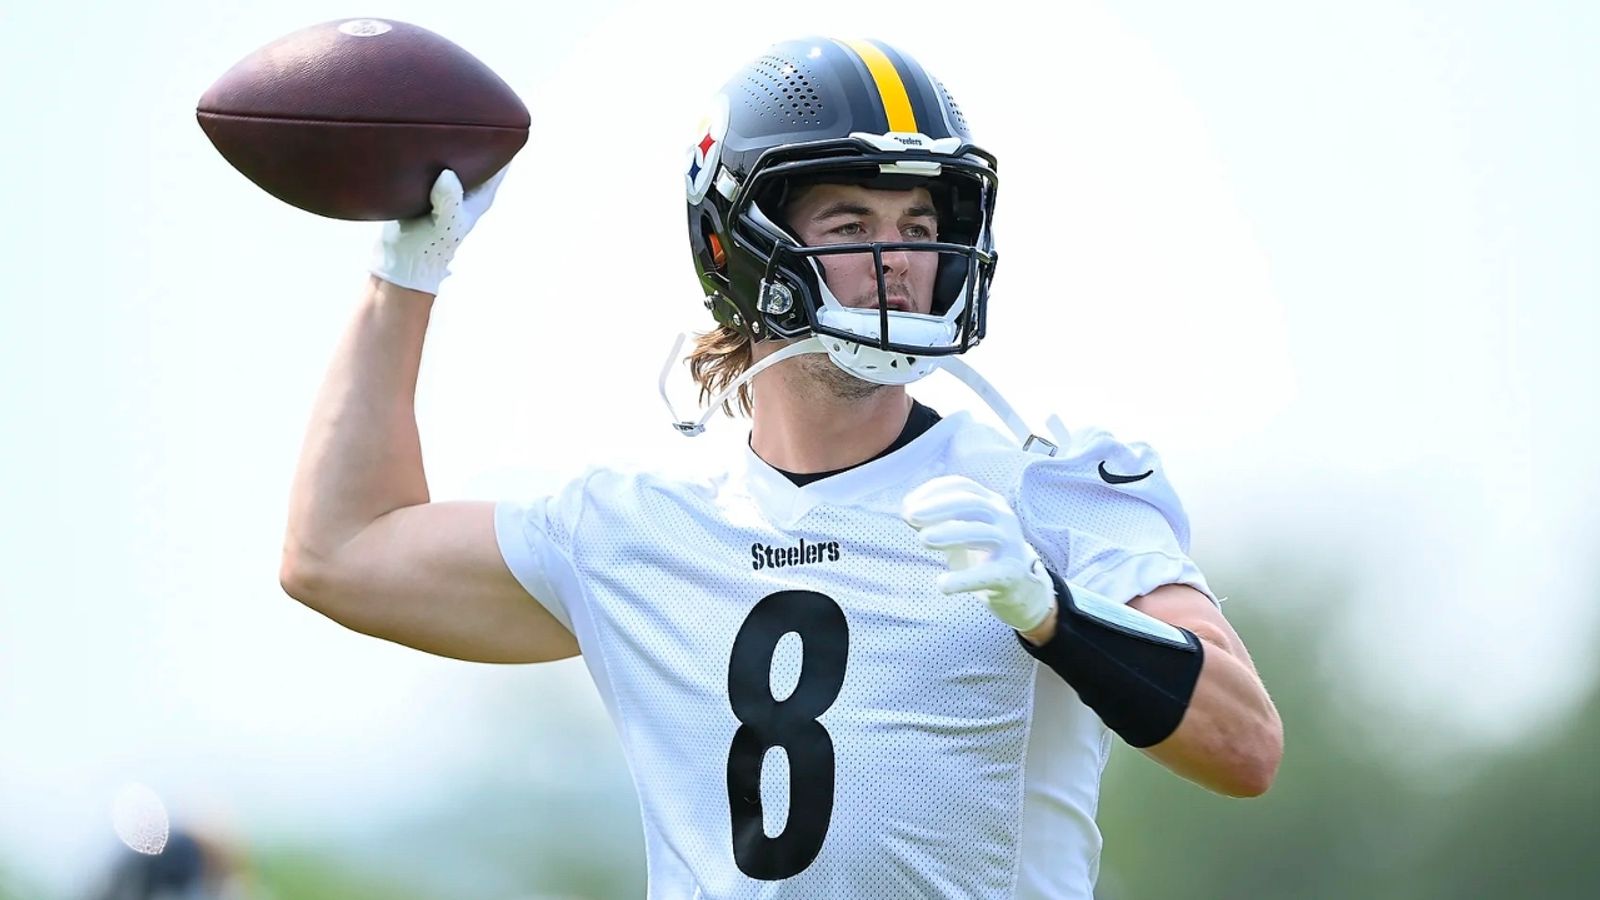 Pat Freiermuth already turning into a reliable weapon in Steelers' offense